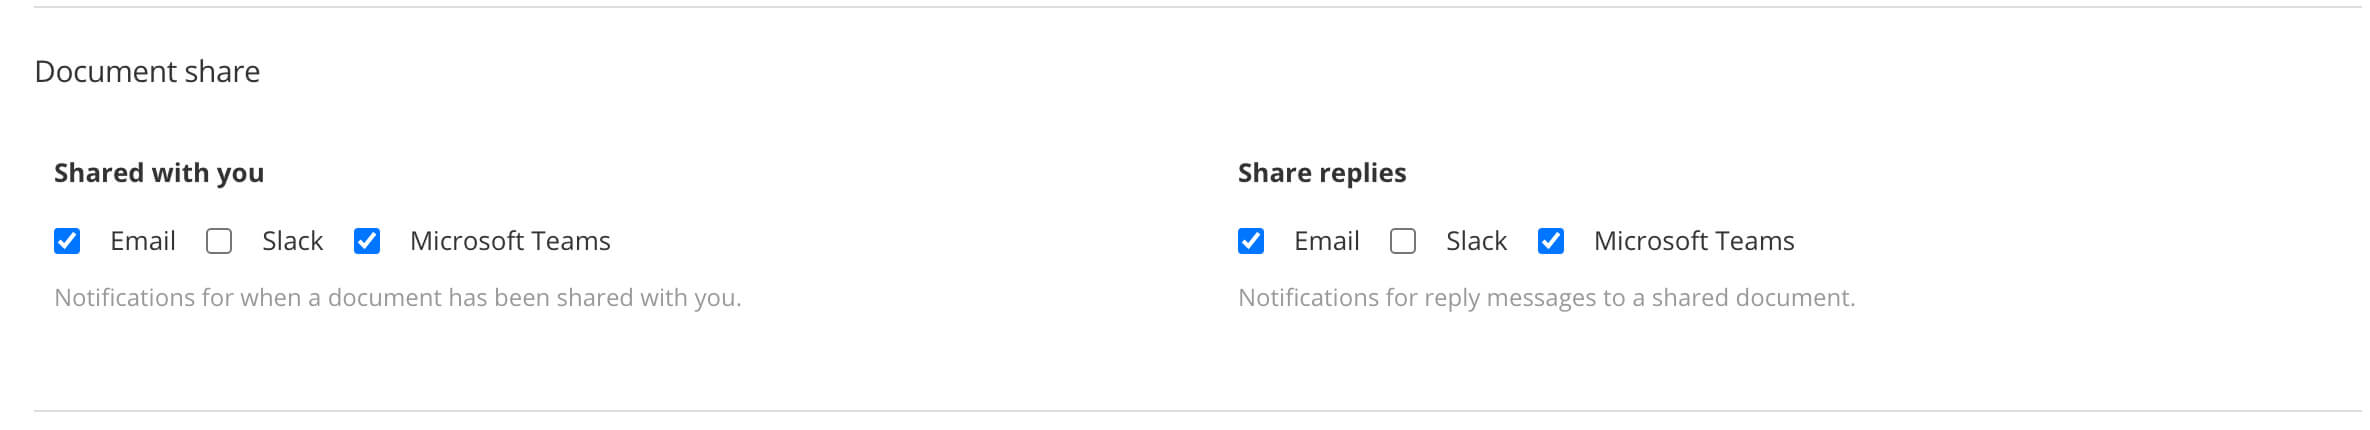 Document share settings on the notifications tab of the My Profile dialog. There are options to choose whether you are notified when content is shared with you or when people reply to a shared document.